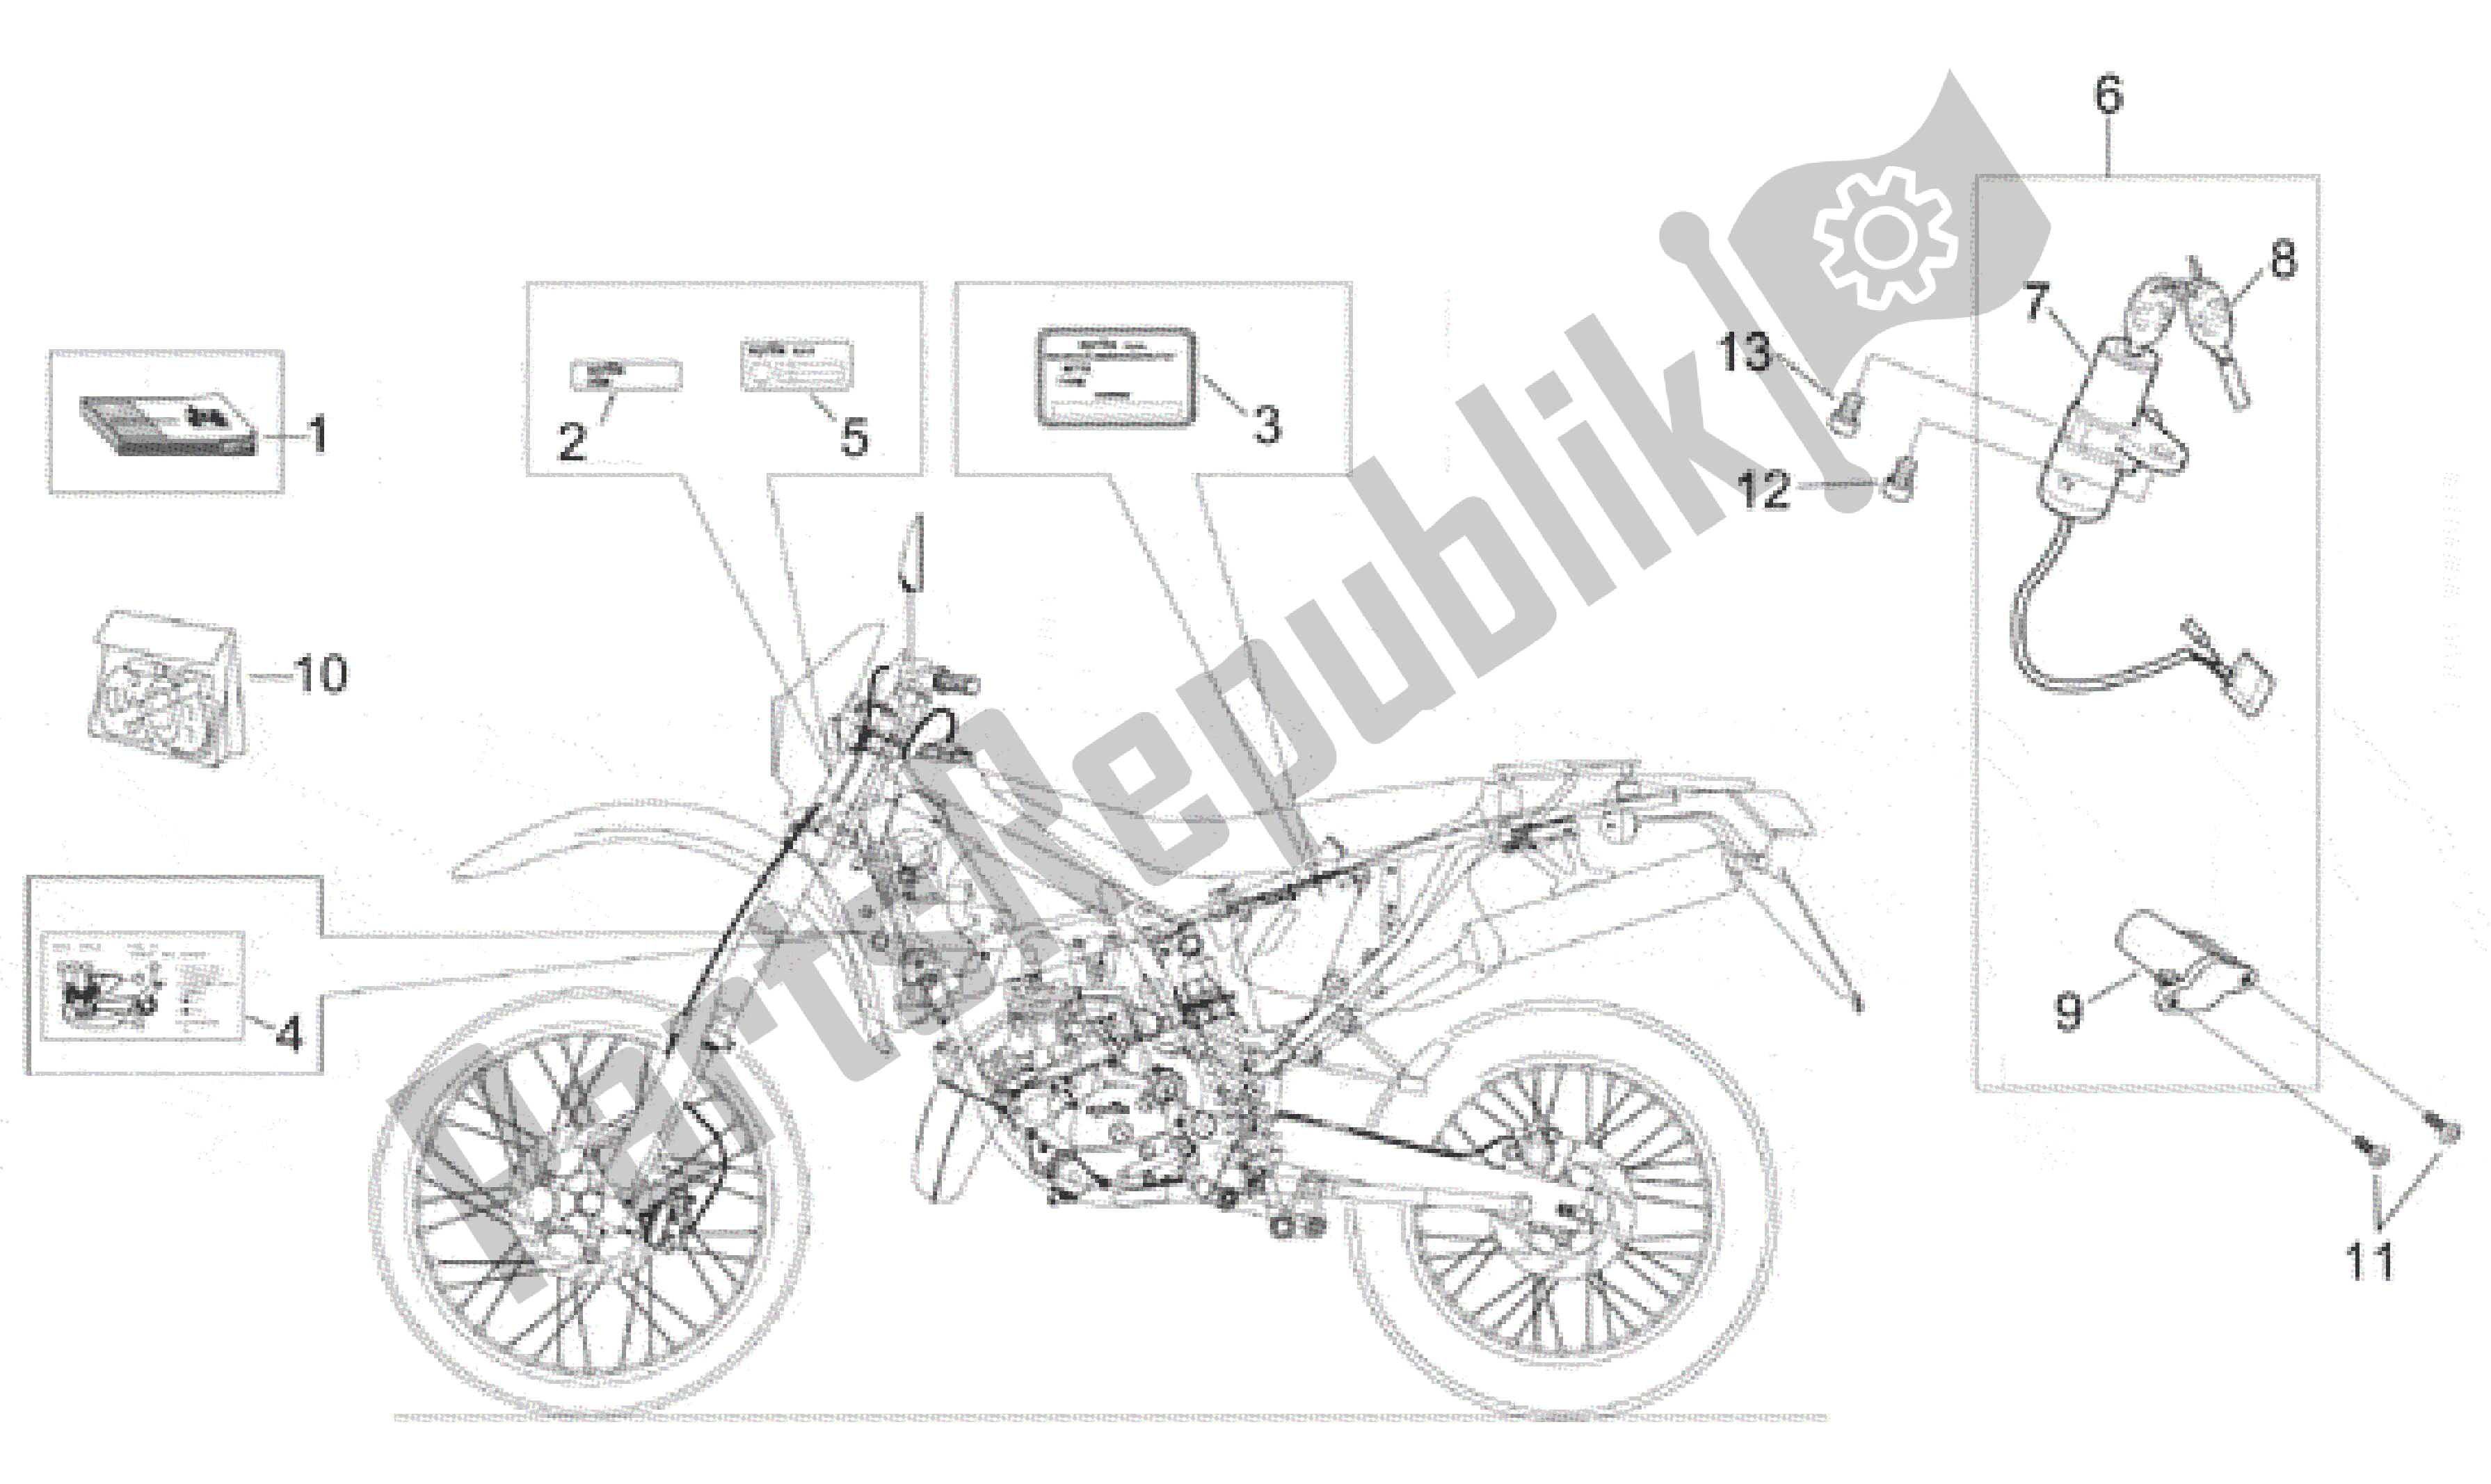 All parts for the Decal And Plate Set of the Aprilia ETX 125 1999 - 2001